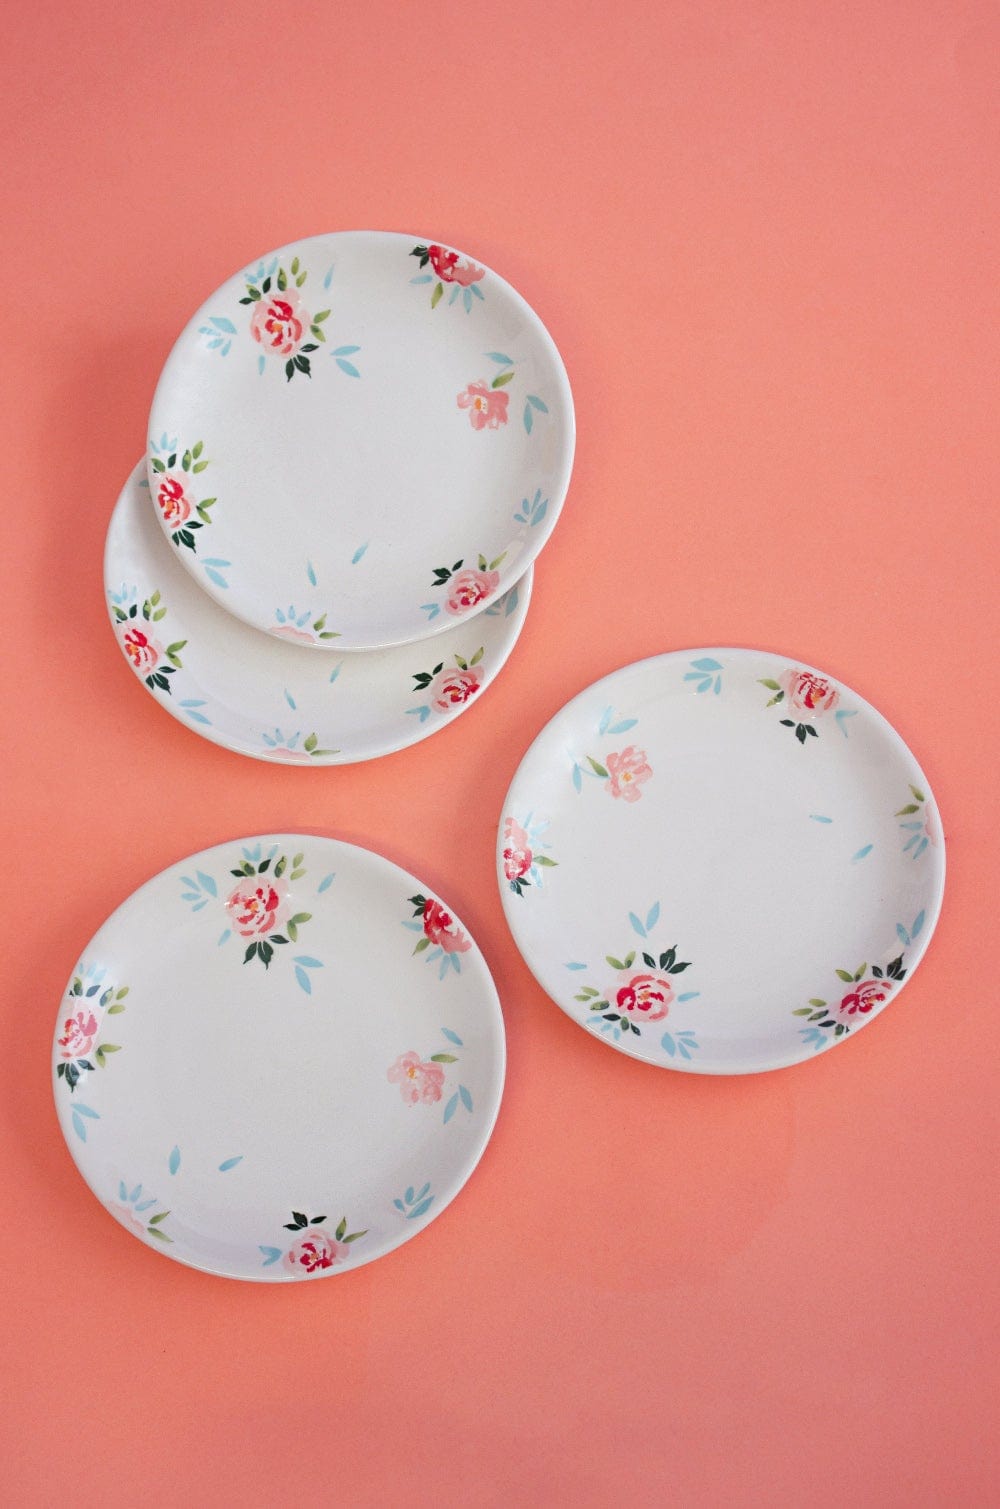 Day Dreams Handpainted Side Plates - Set of 4